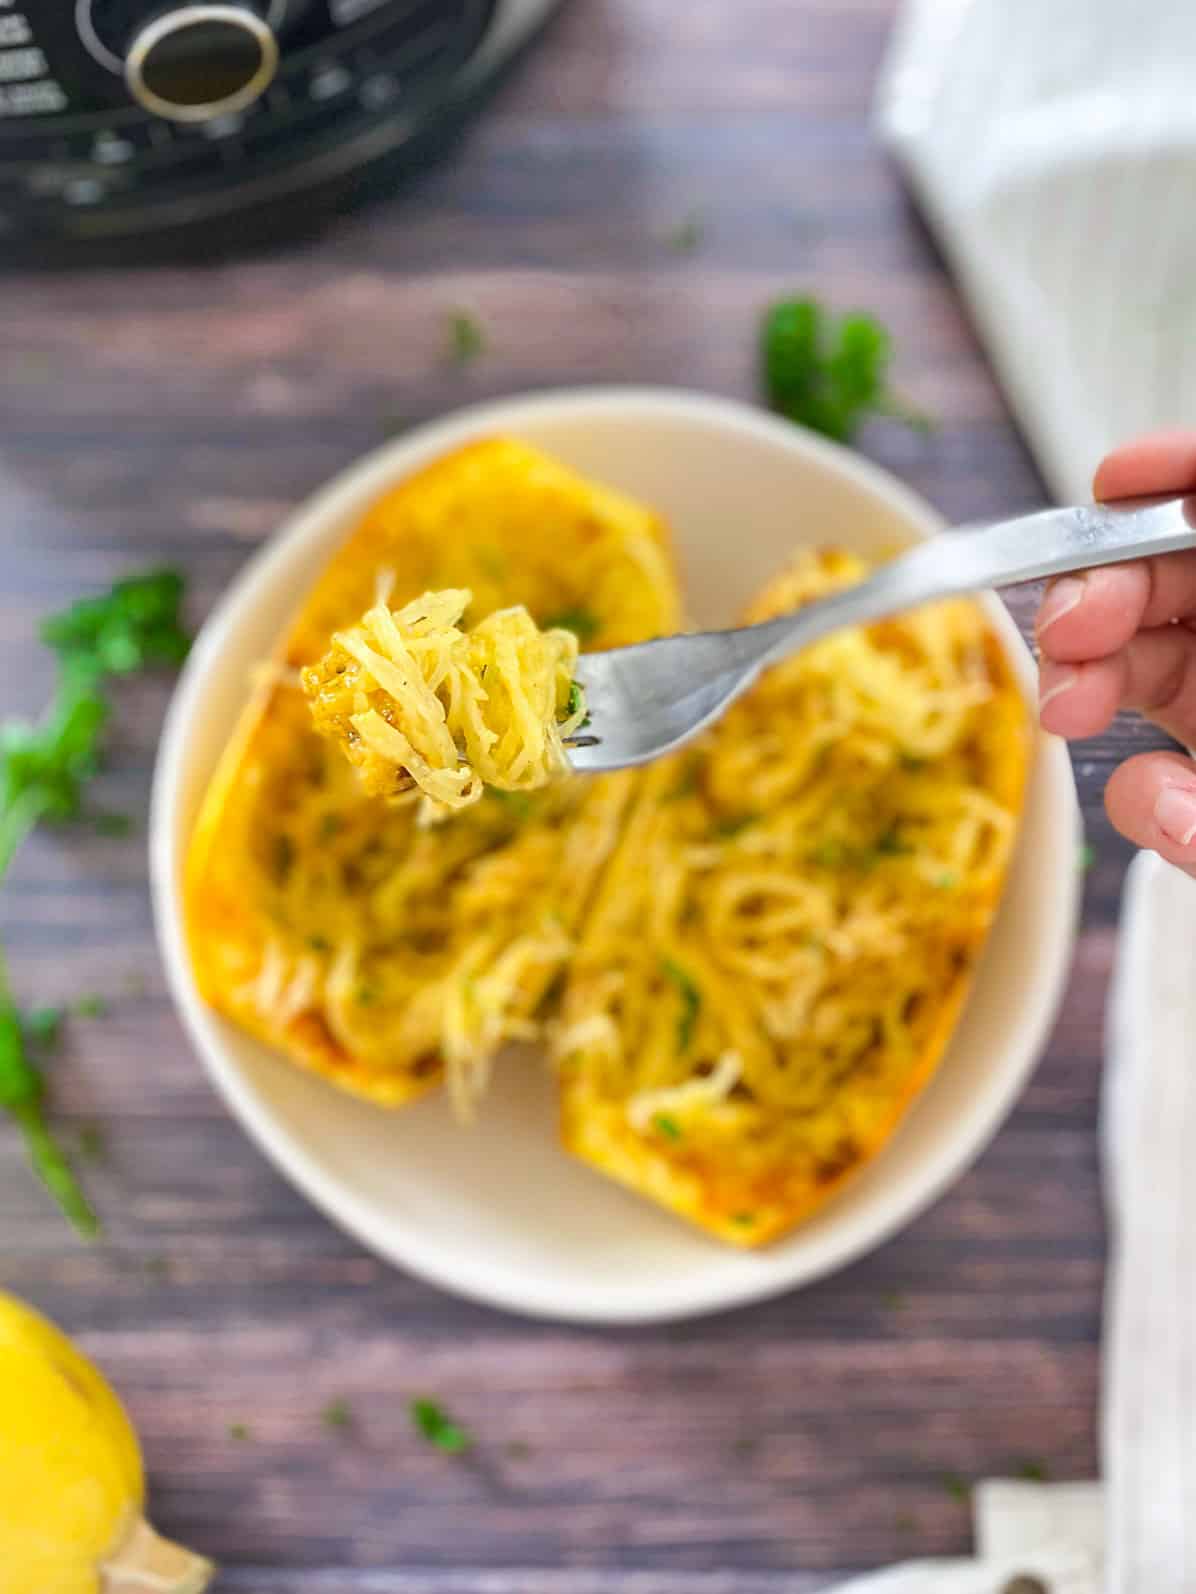 Fork full of spaghetti squash with halved spaghetti squash in bowl below and air fryer in the background.